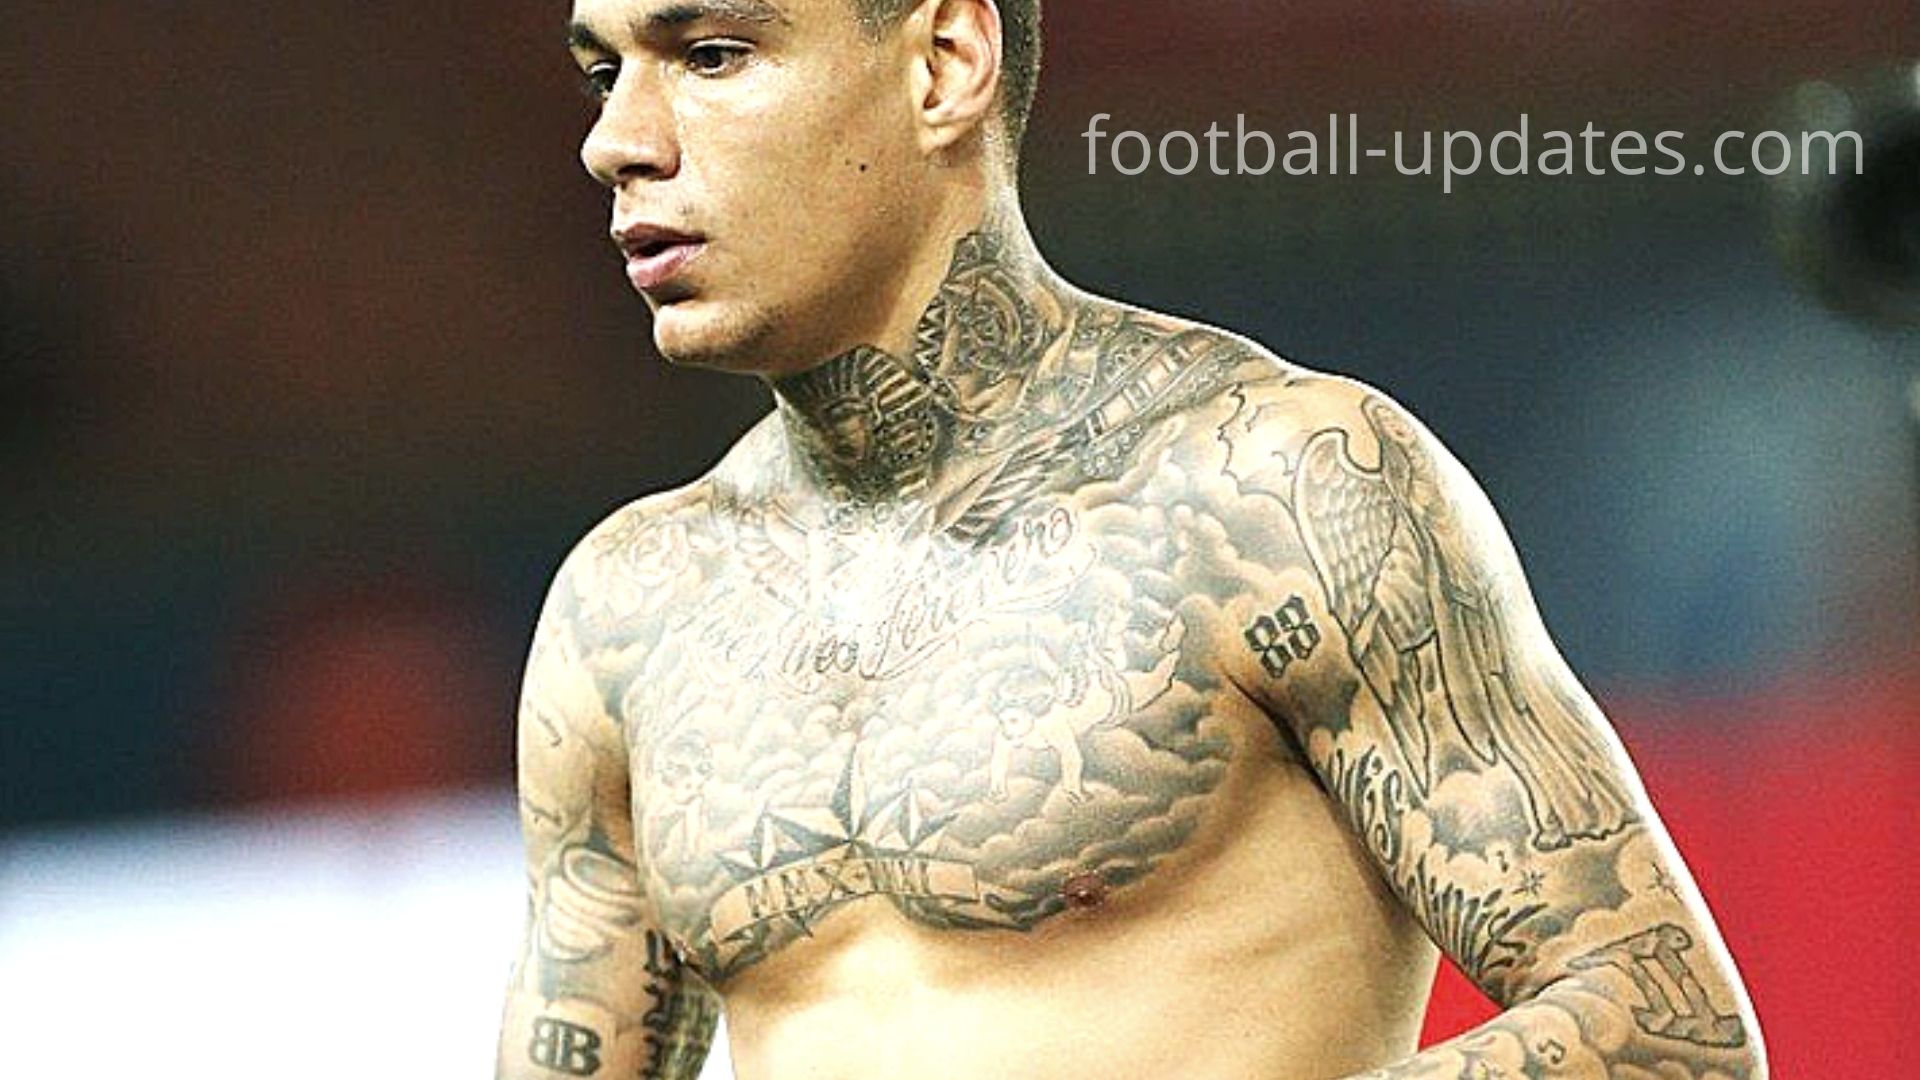 The soccer player whos covered his entire back with a tattoo of Jesus